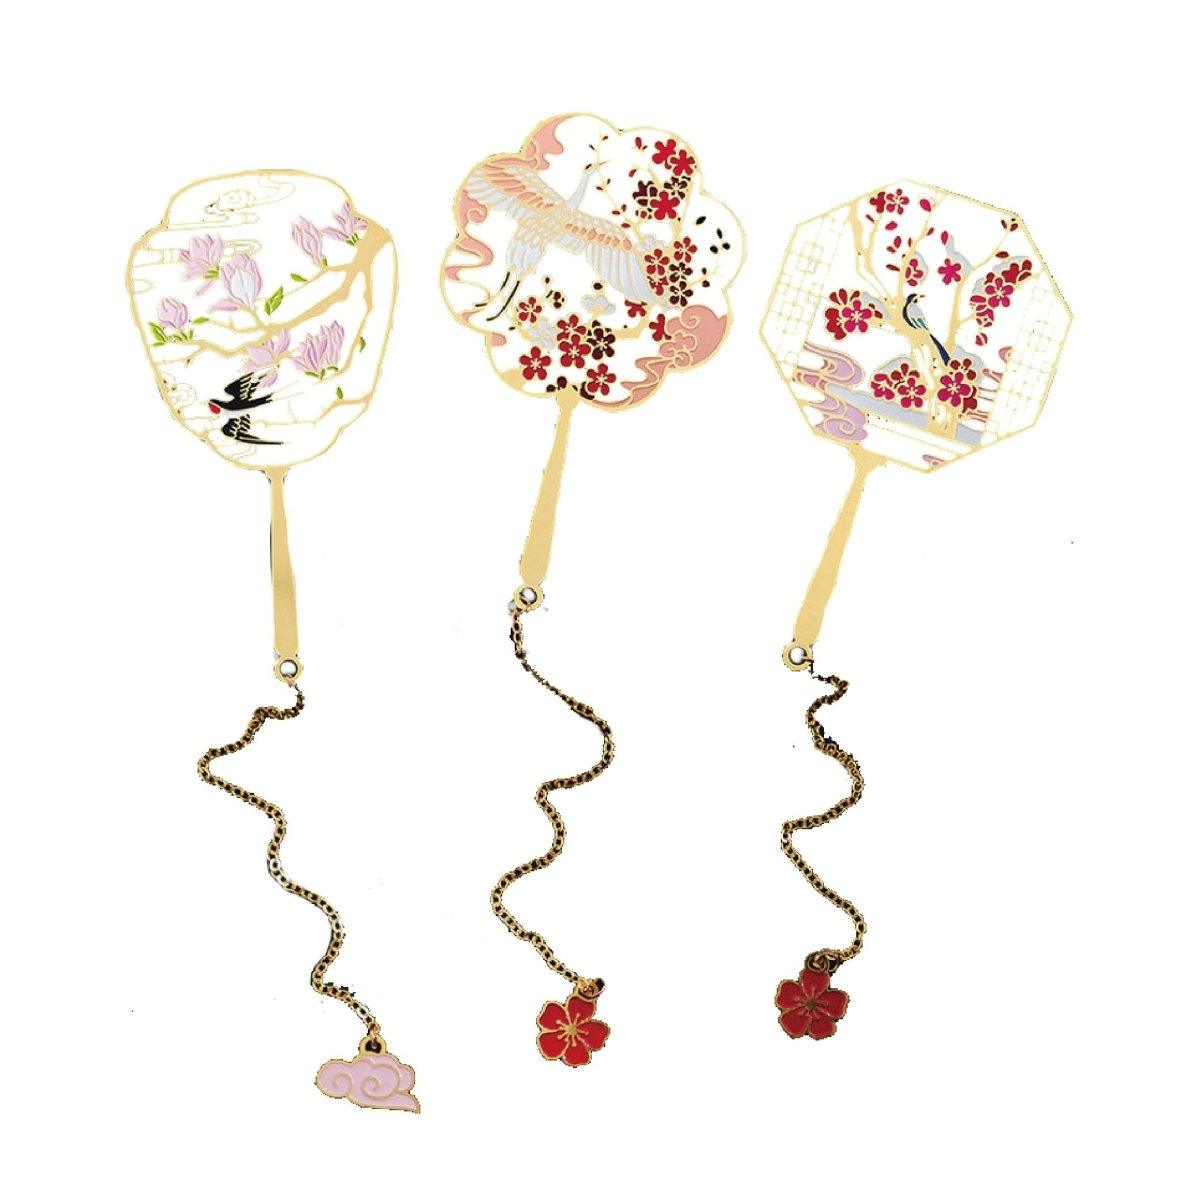 Chinese style metal classical hollow fan bookmark NP-090017 - CHL-STORE 